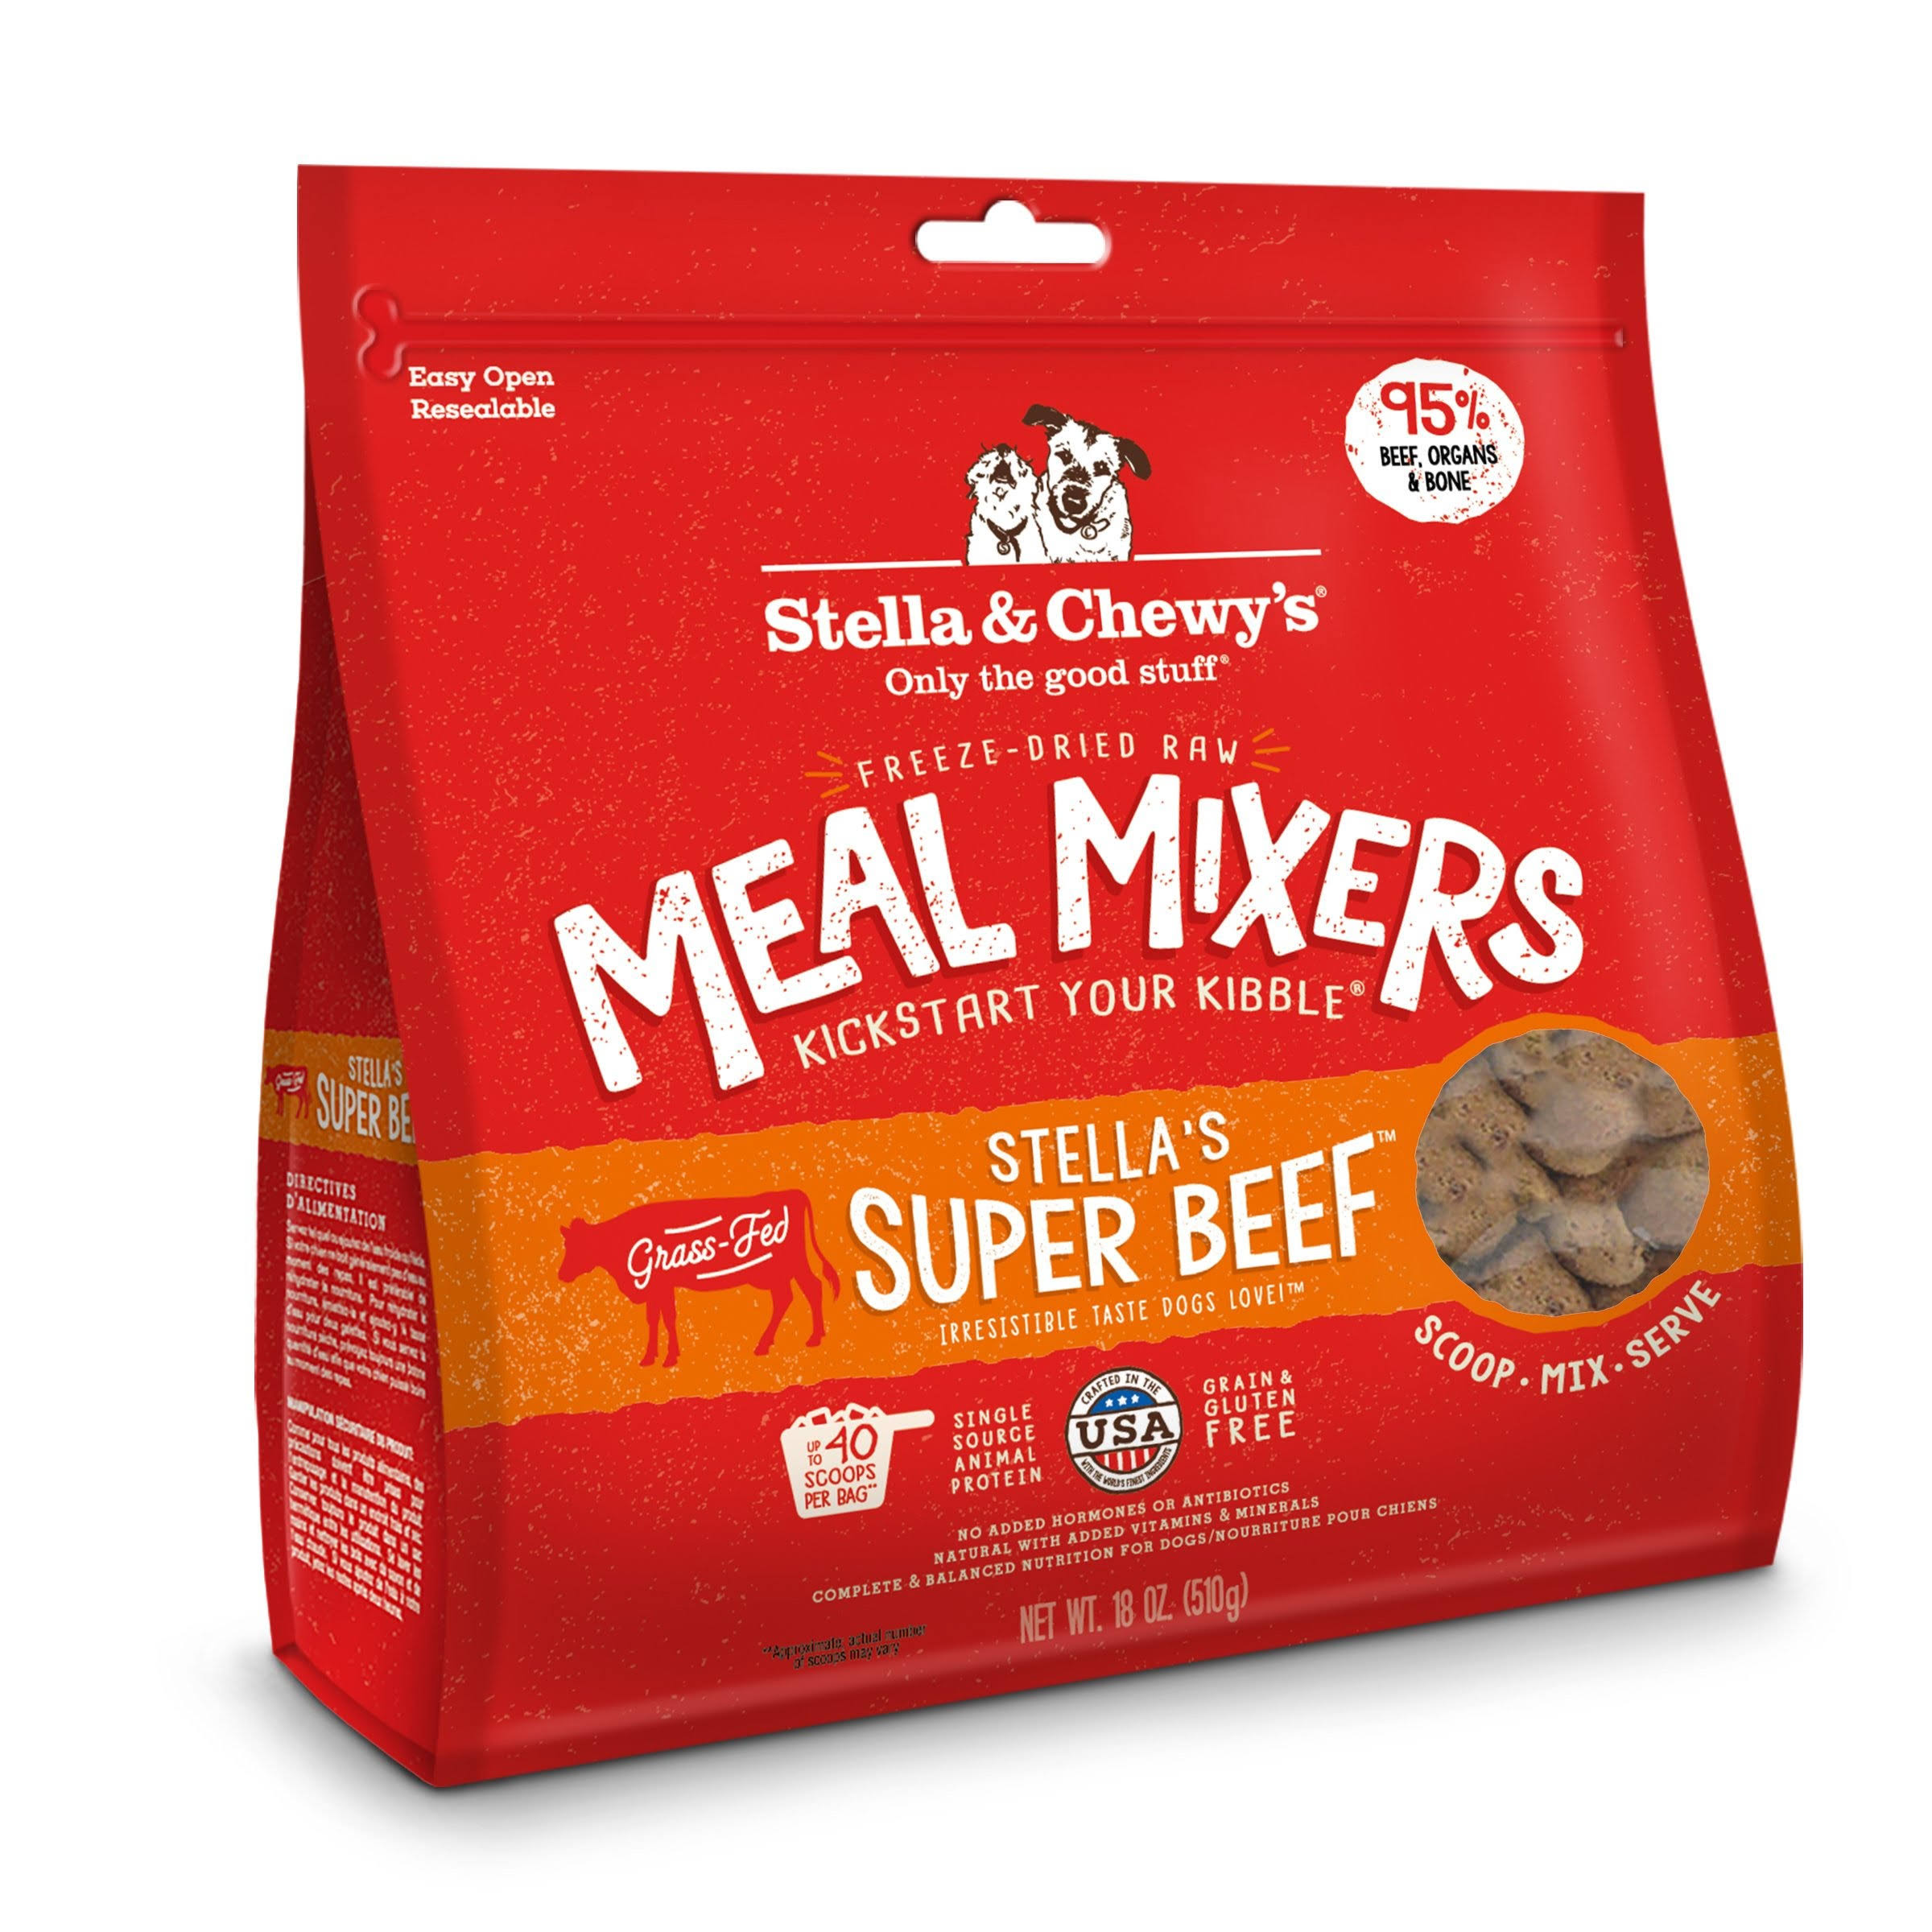 Stella & Chewy's Freeze-Dried Meal Mixers Stella's Super Beef 35OZ